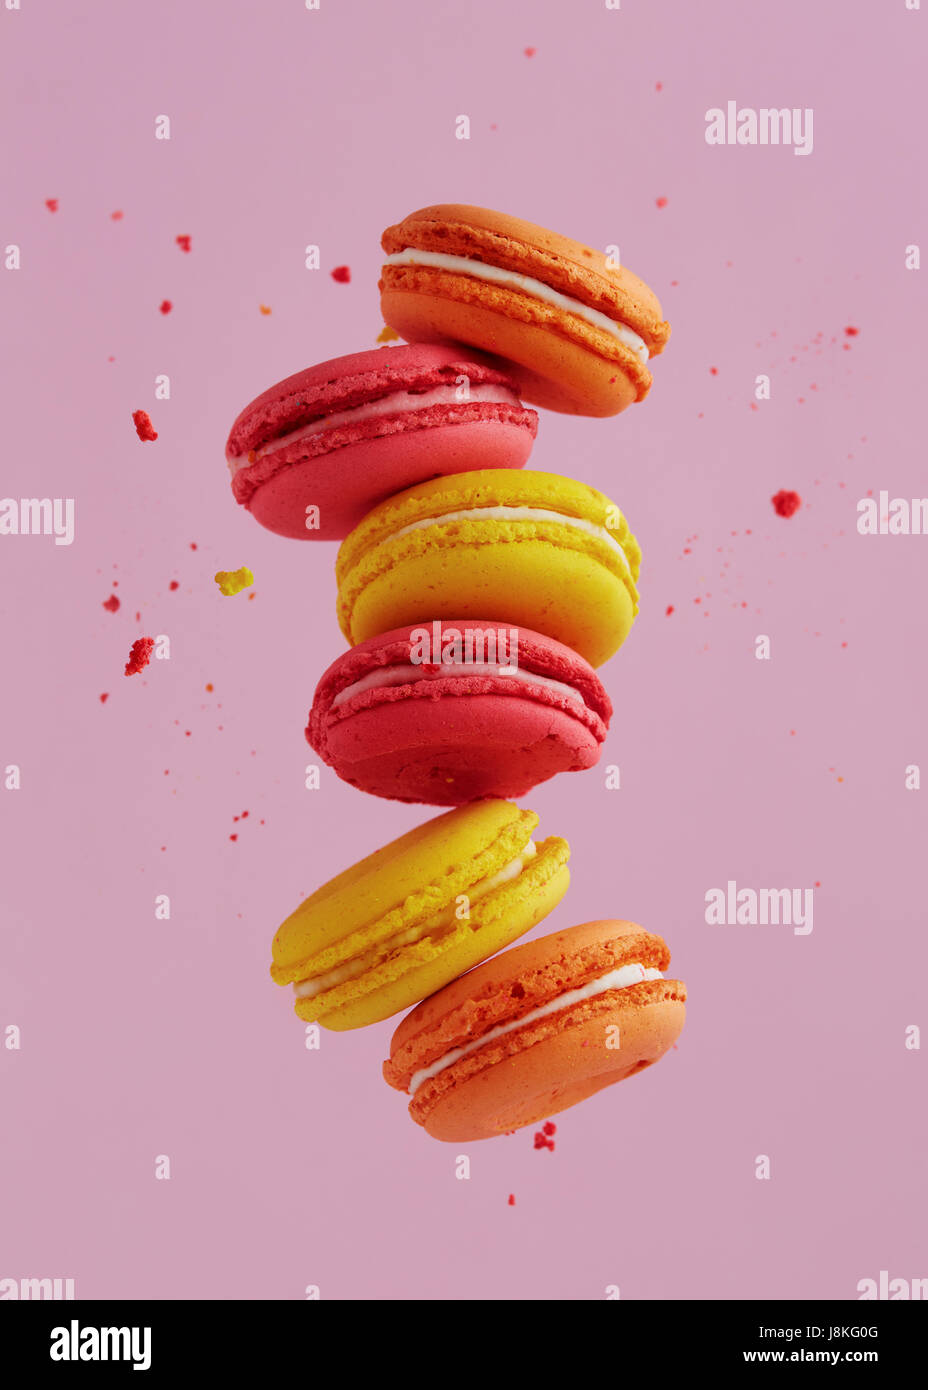 Different types of macaroons in motion falling on pink background. Sweet and colourful french macaroons falling or flying in motion. Stock Photo